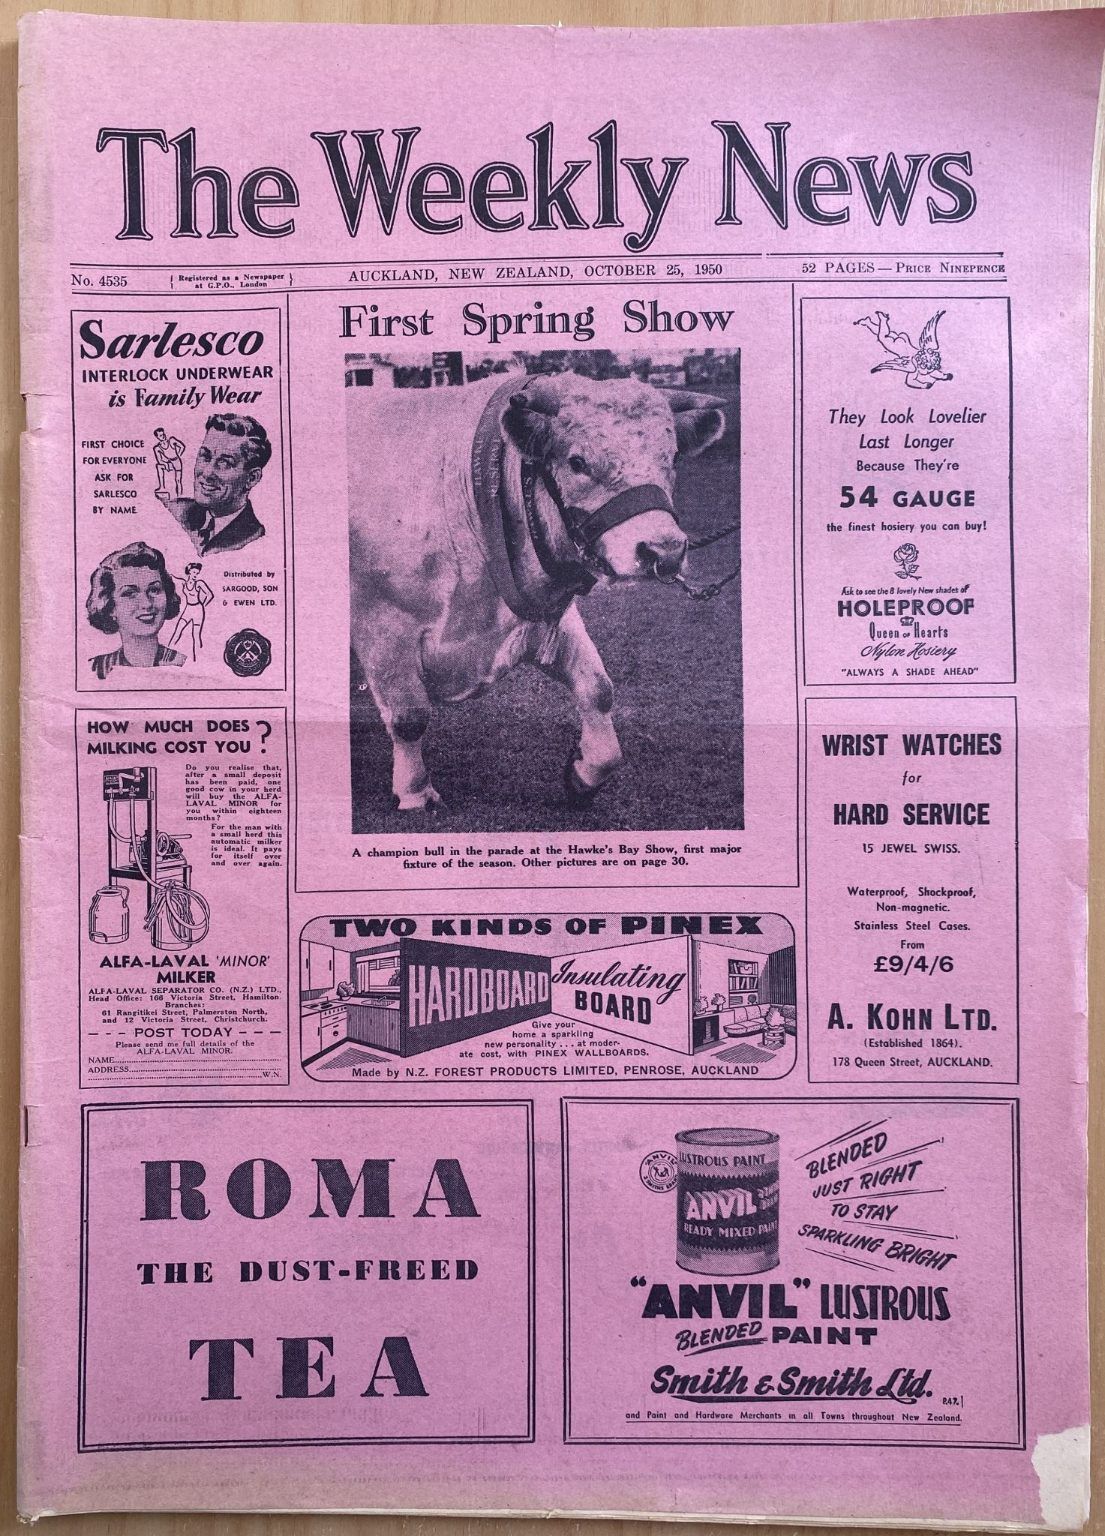 OLD NEWSPAPER: The Weekly News, No. 4535, 25 October 1950